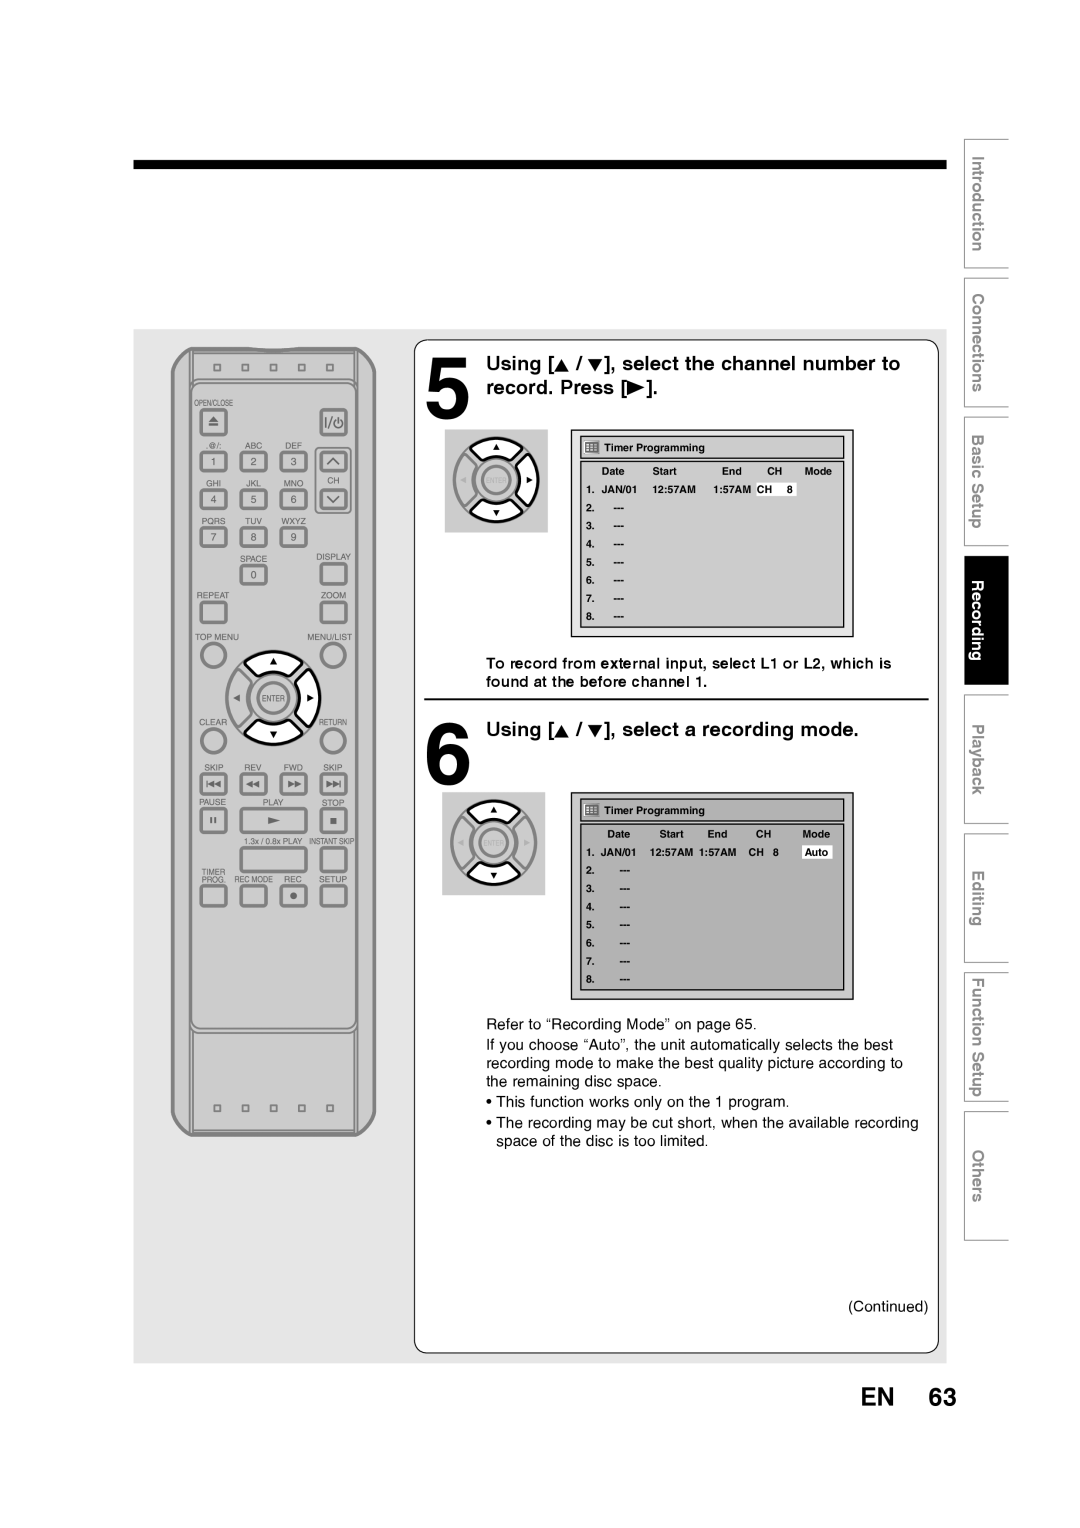 Toshiba D-RW2SU/D-RW2SC Using K / L, select the channel number to record. Press B, Using K / L, select a recording mode 